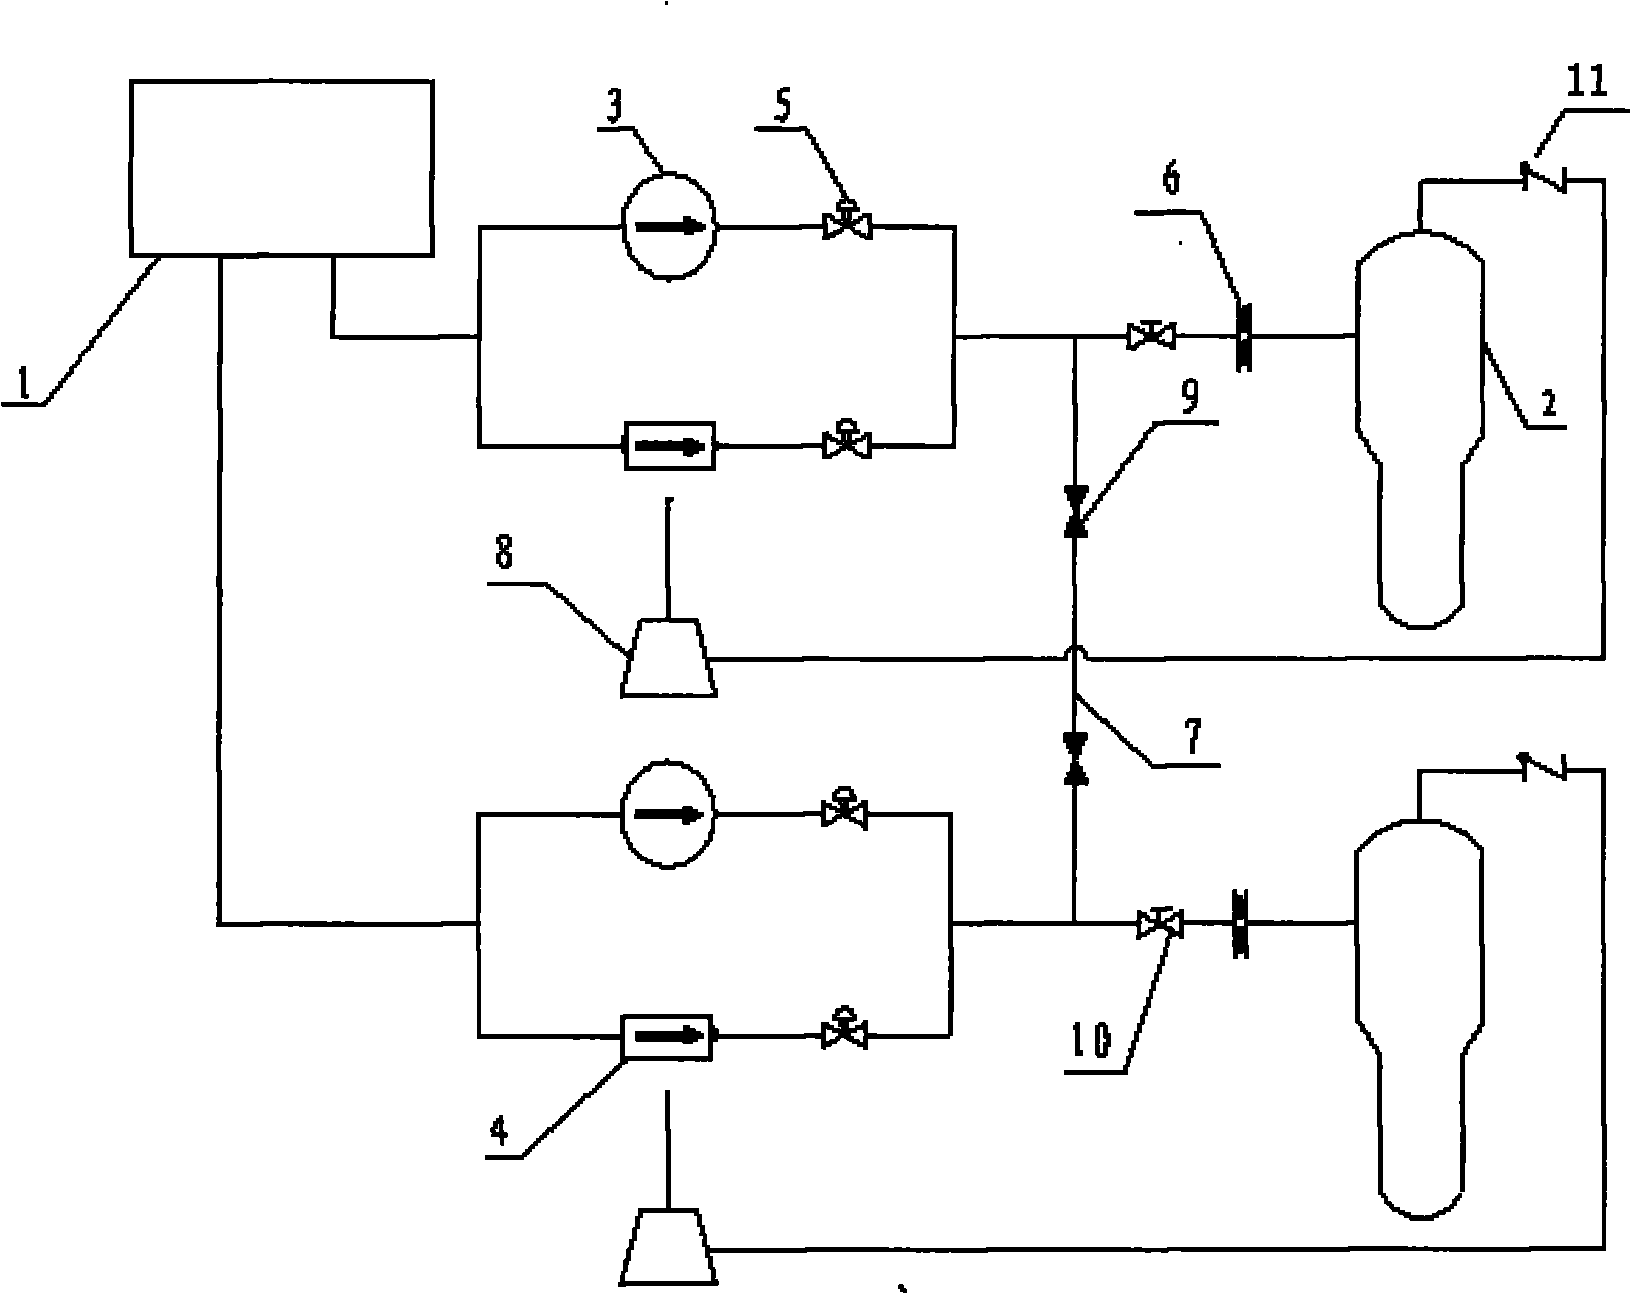 Auxiliary water supply system used for nuclear power station single reactor and actuating safety function